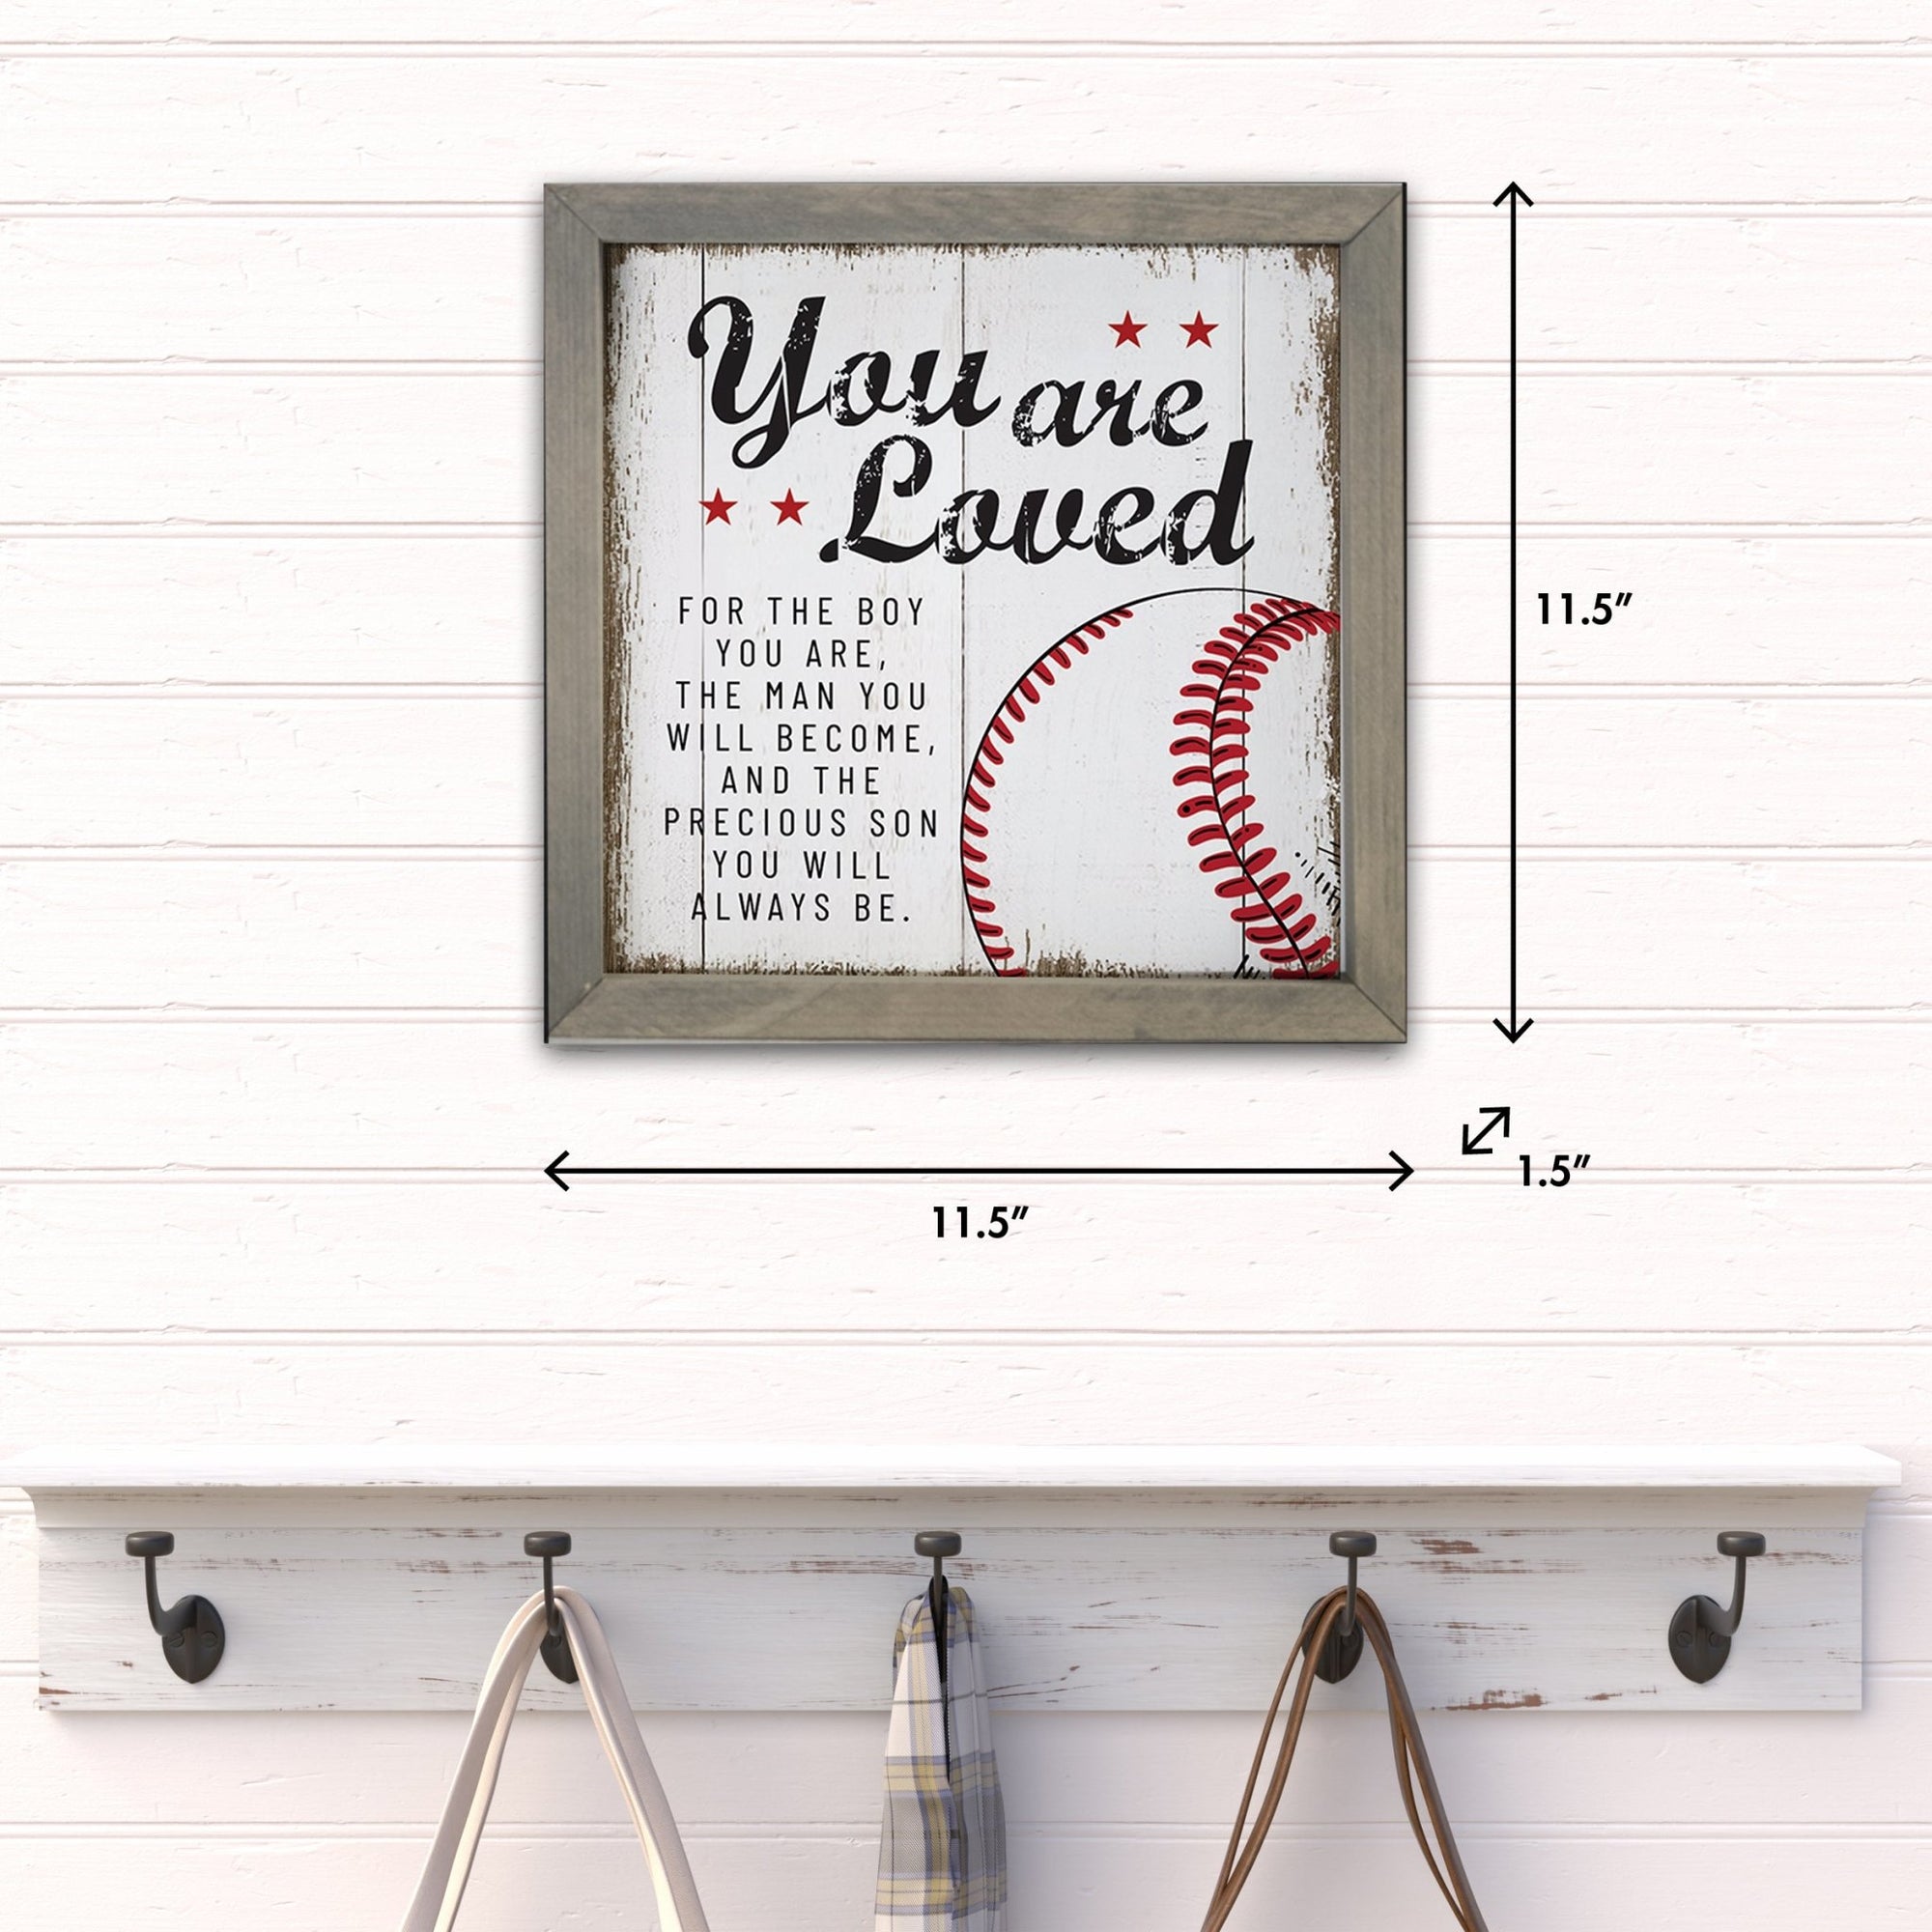 Elegant Baseball Framed Shadow Box Shelf Décor With Inspiring Bible Verses - You Are Loved - LifeSong Milestones